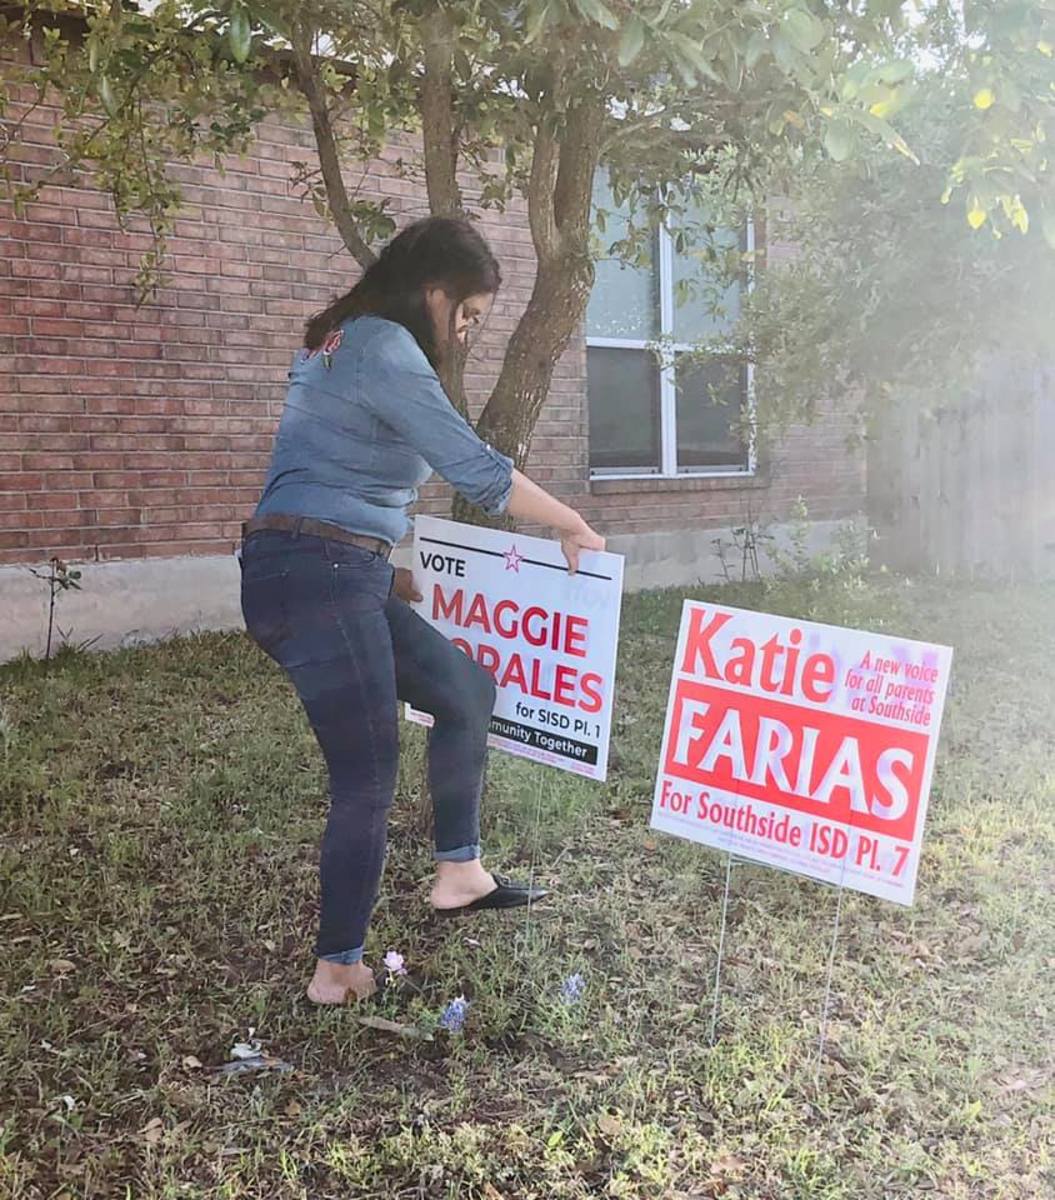 Maggie Morales and Katie Farias, keeping it together. Southside ISD school board candidates.